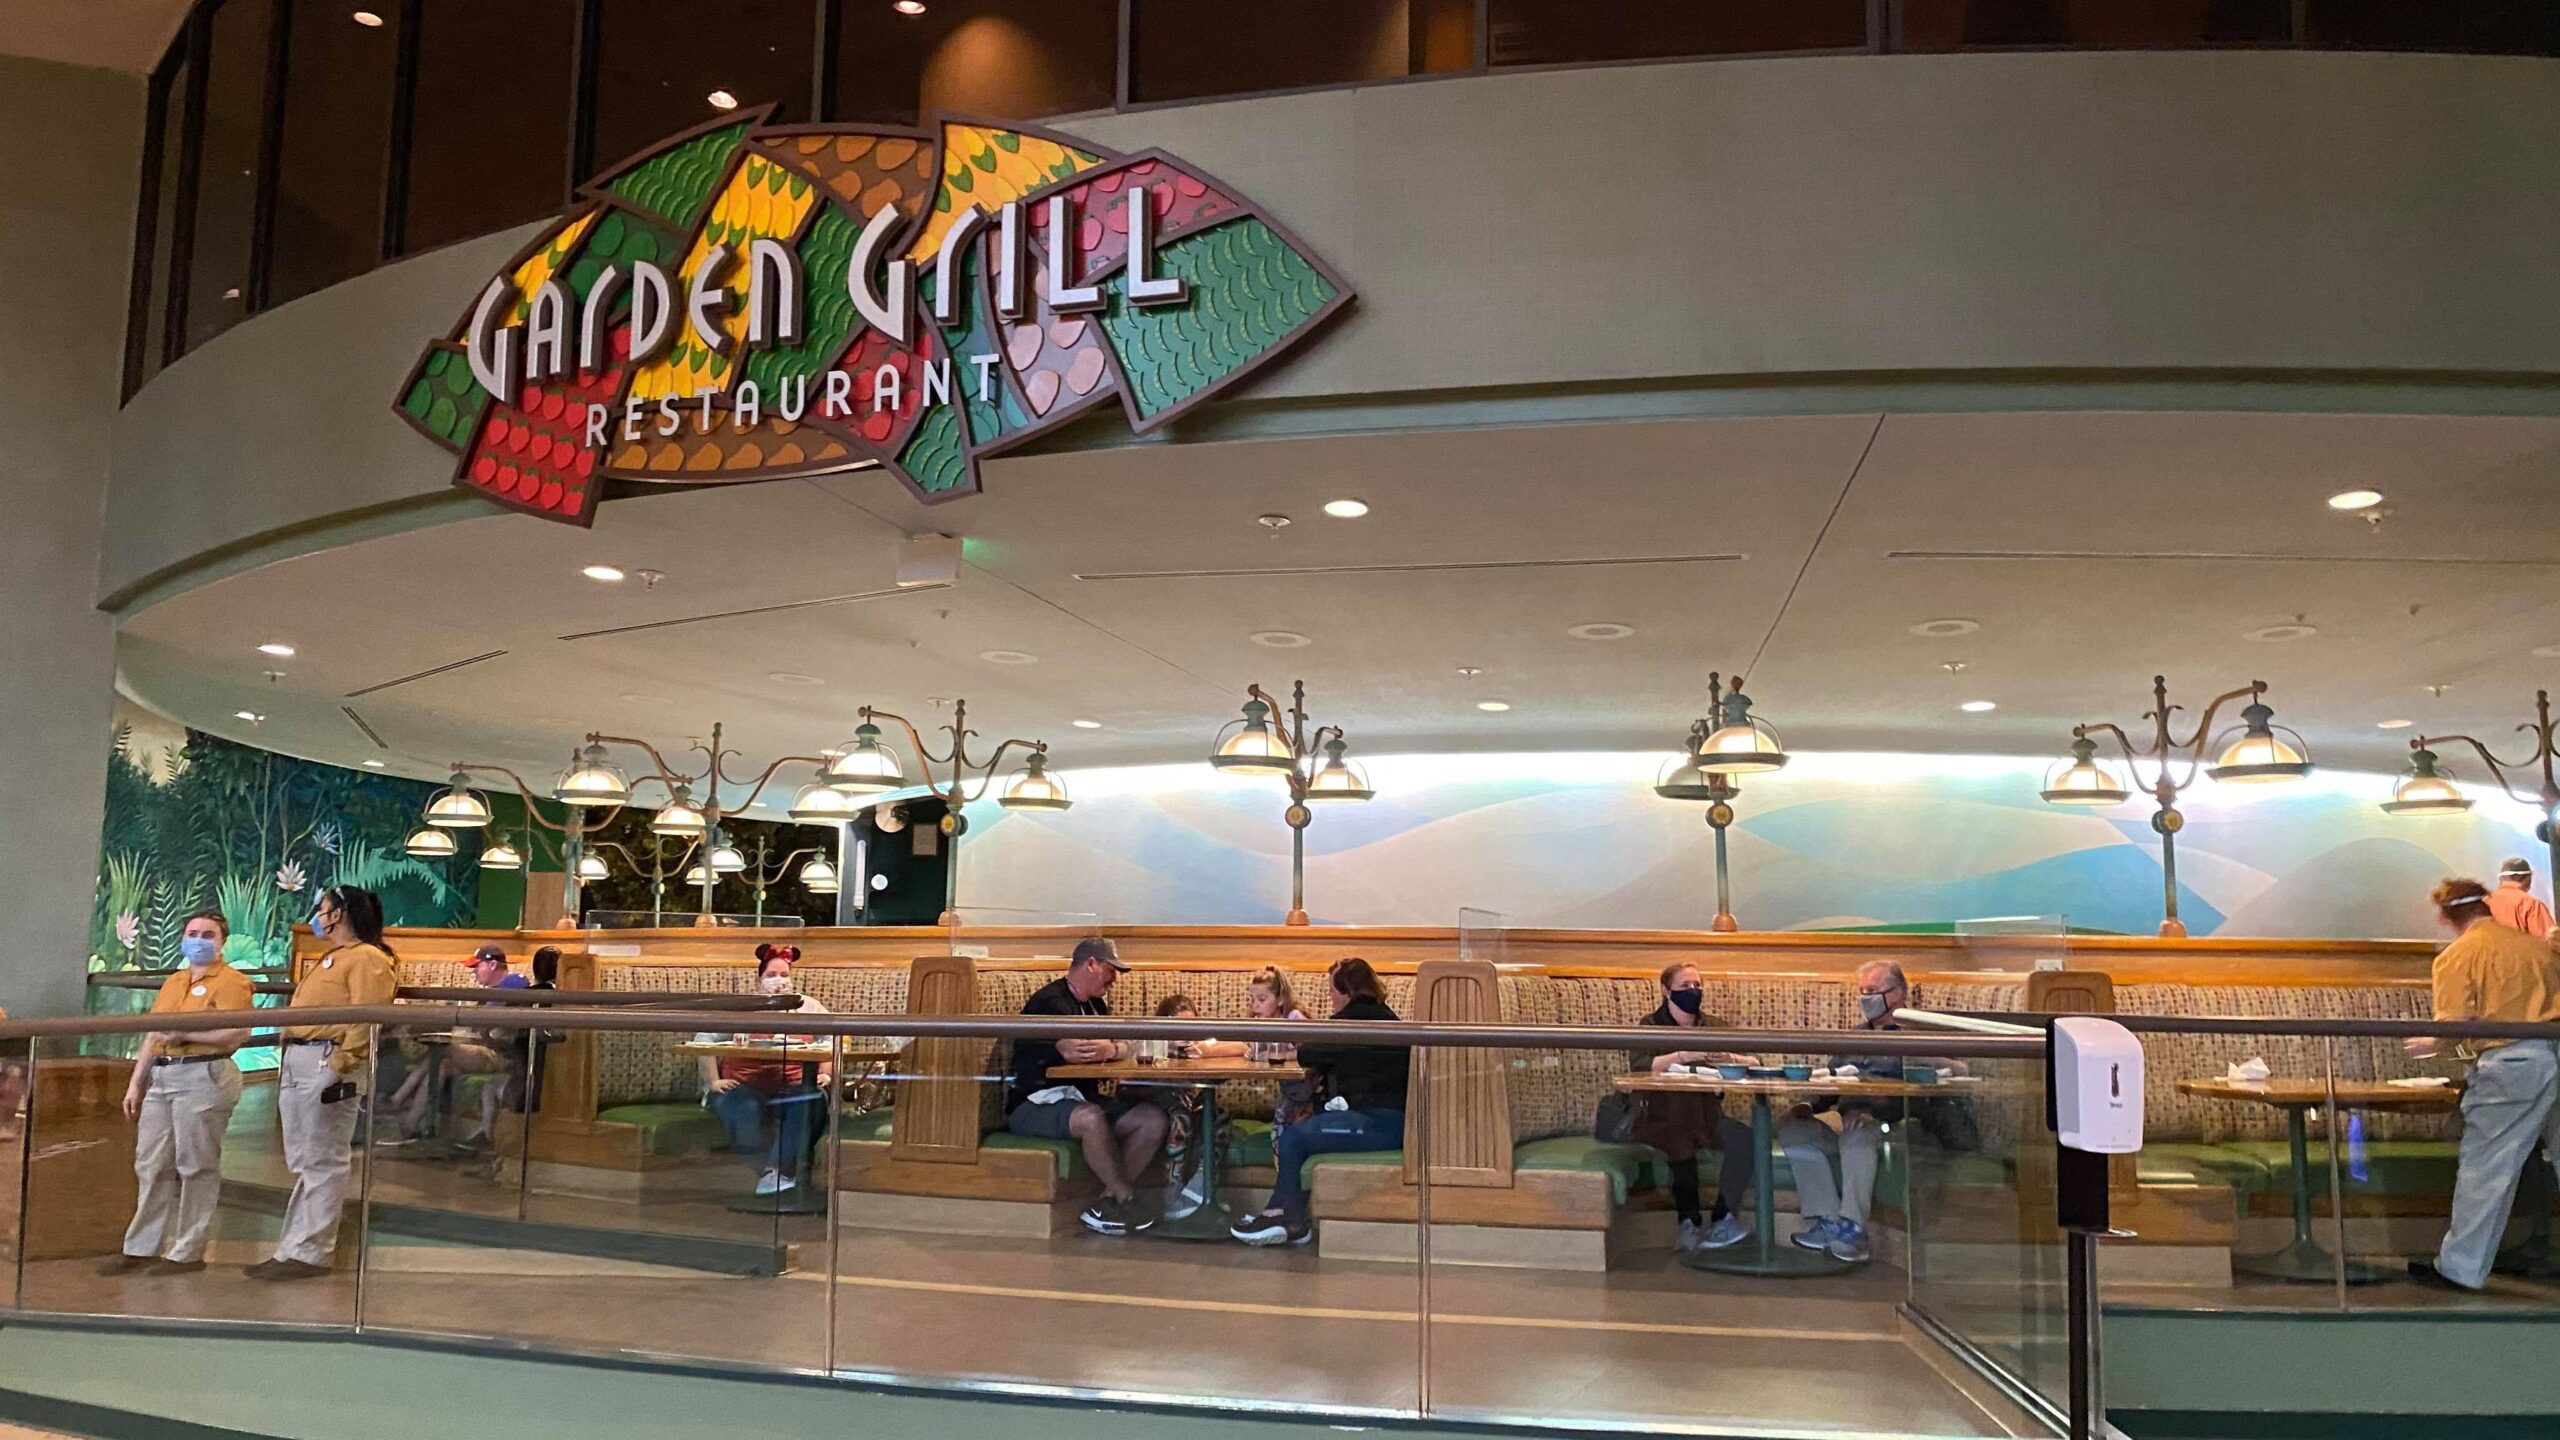 Epcot's Garden Grill is rotating again